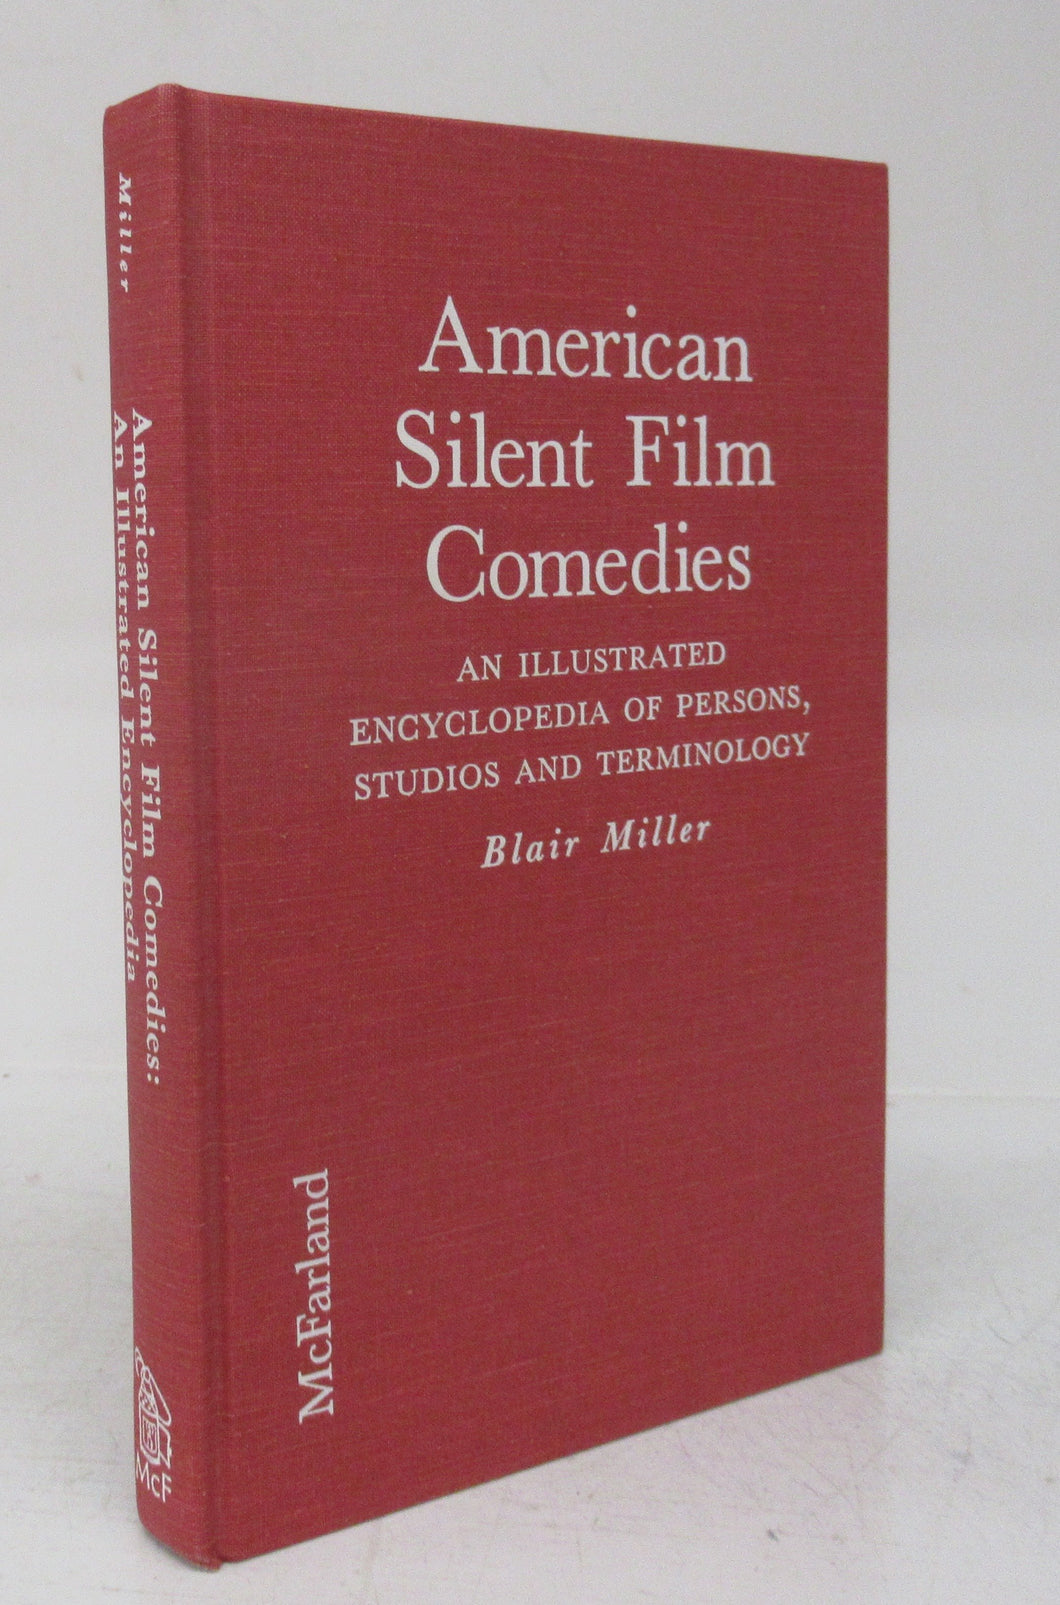 American Silent Film Comedies: An Illustrated Encyclopedia of Person, Studios and Terminology